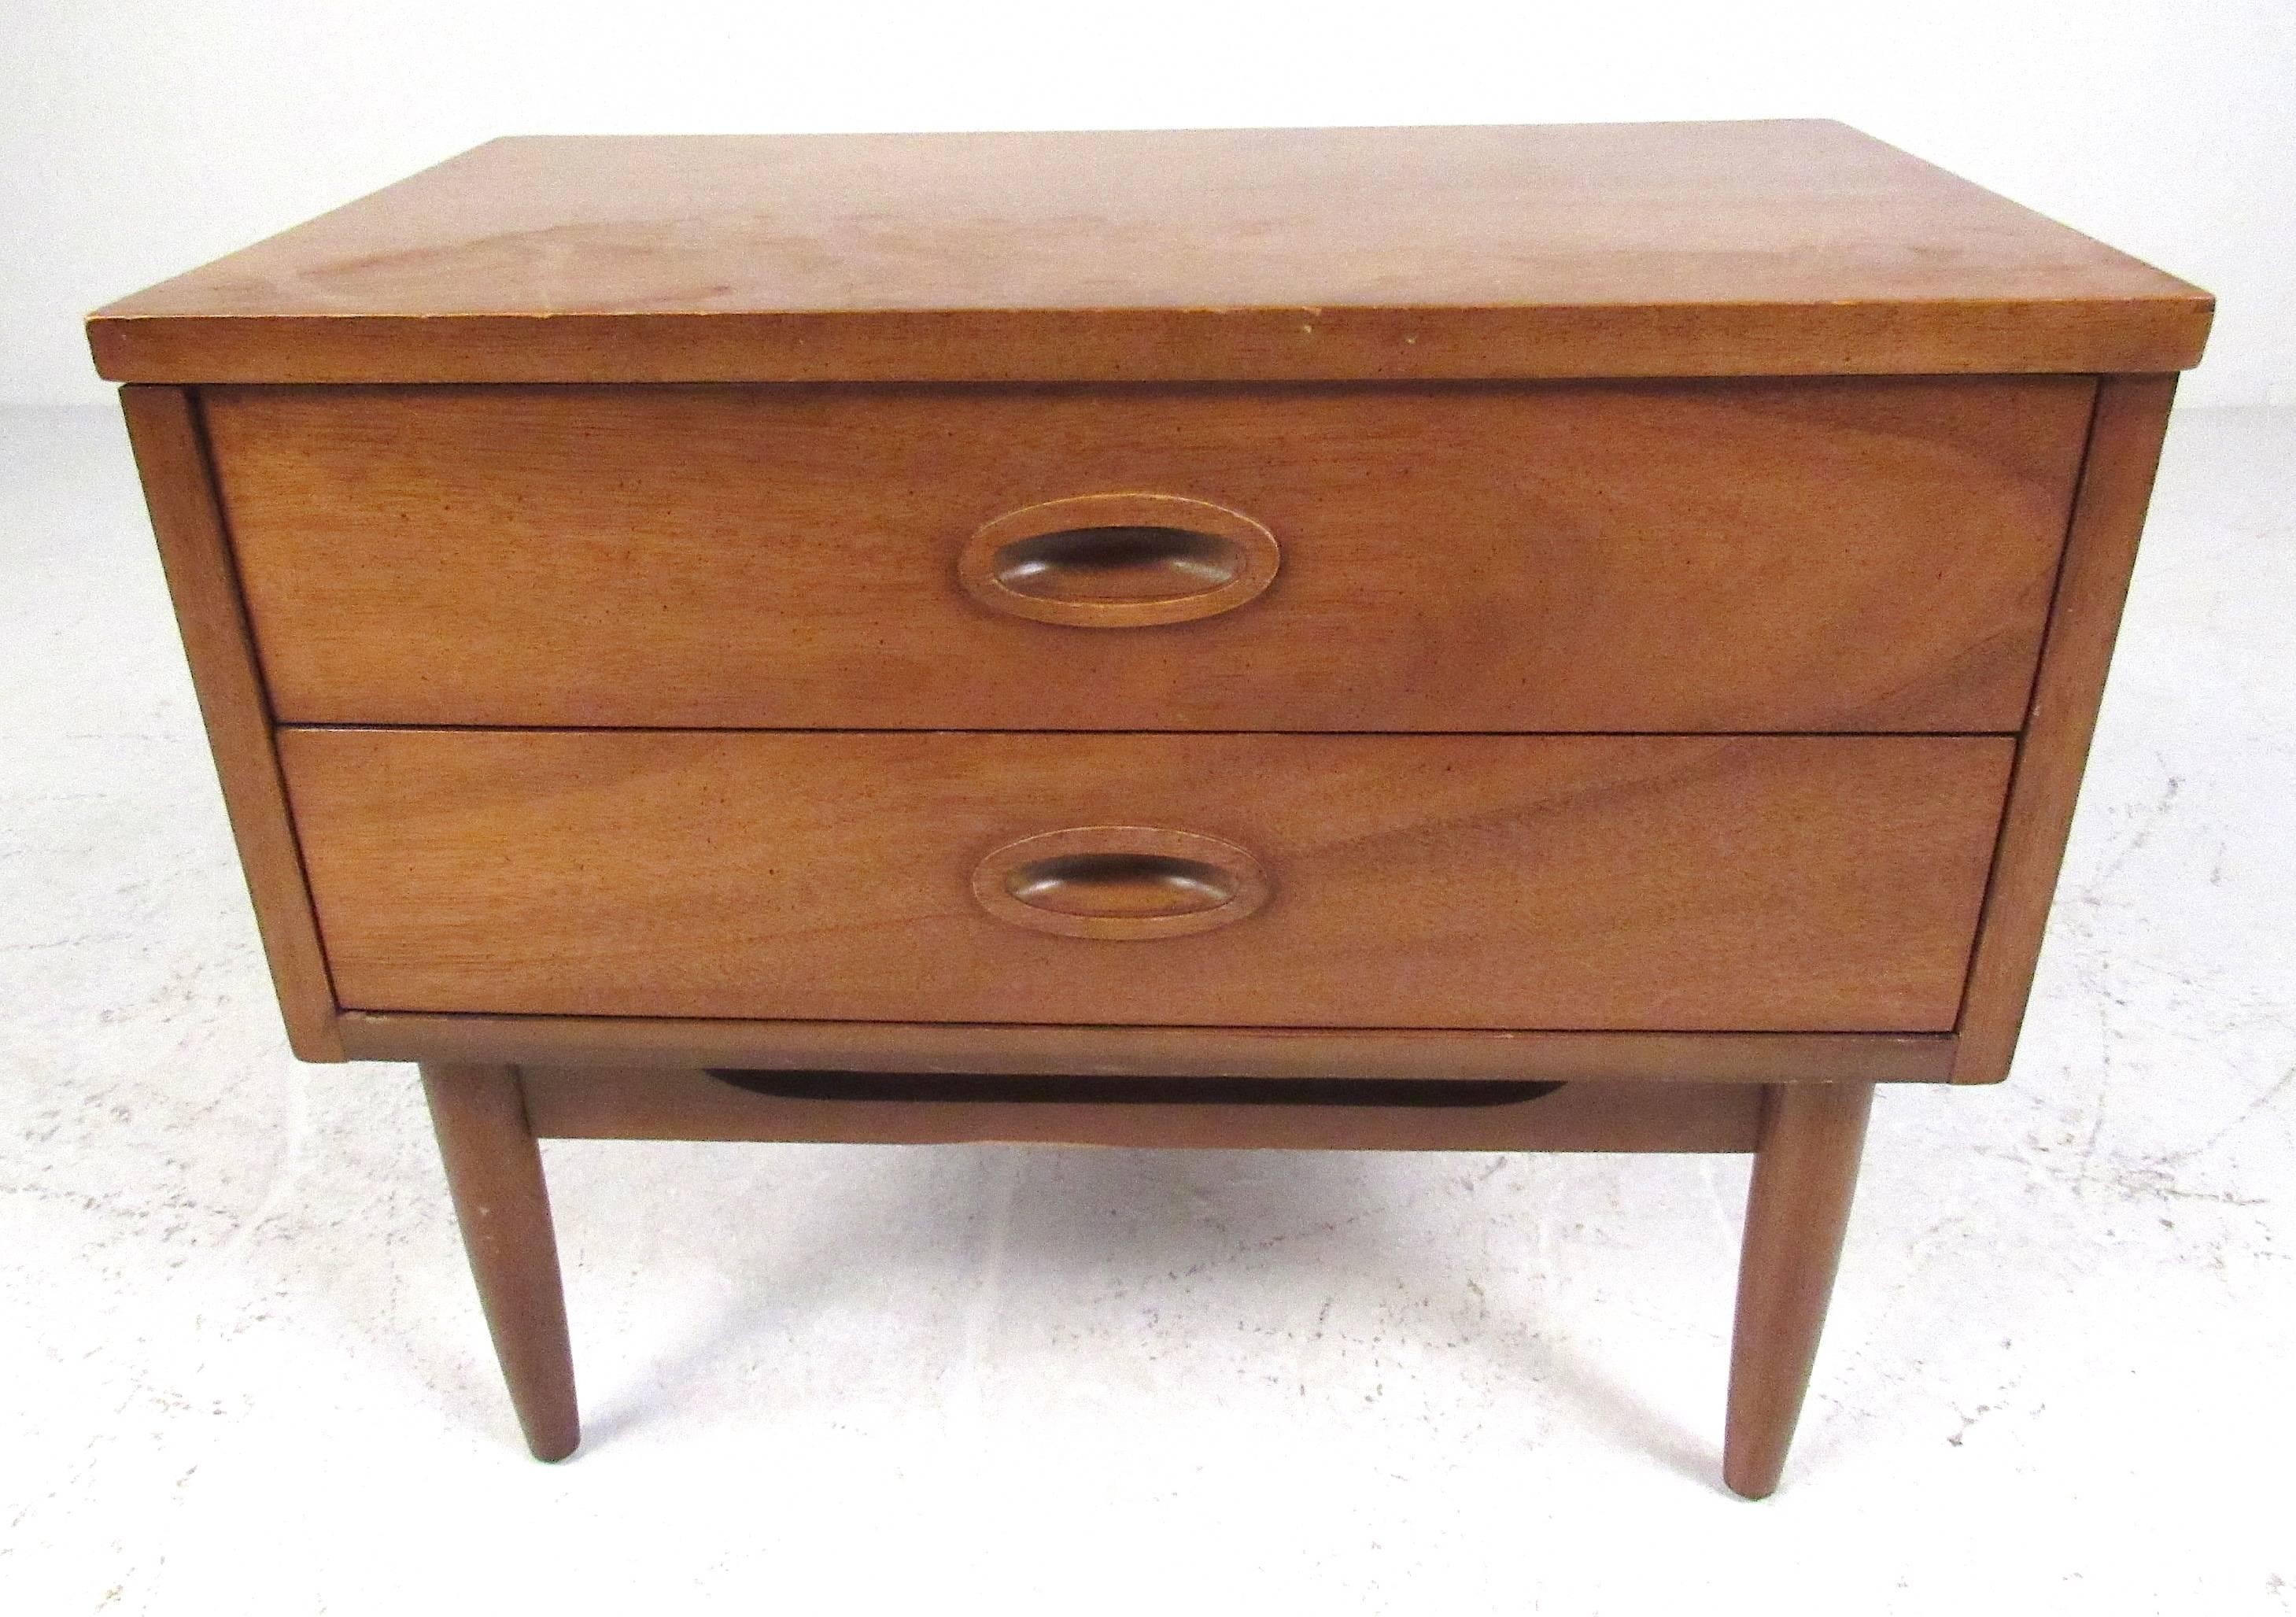 Two-drawer walnut nightstand by Dixie Furniture Co. Please confirm item location (NY or NJ) with dealer.